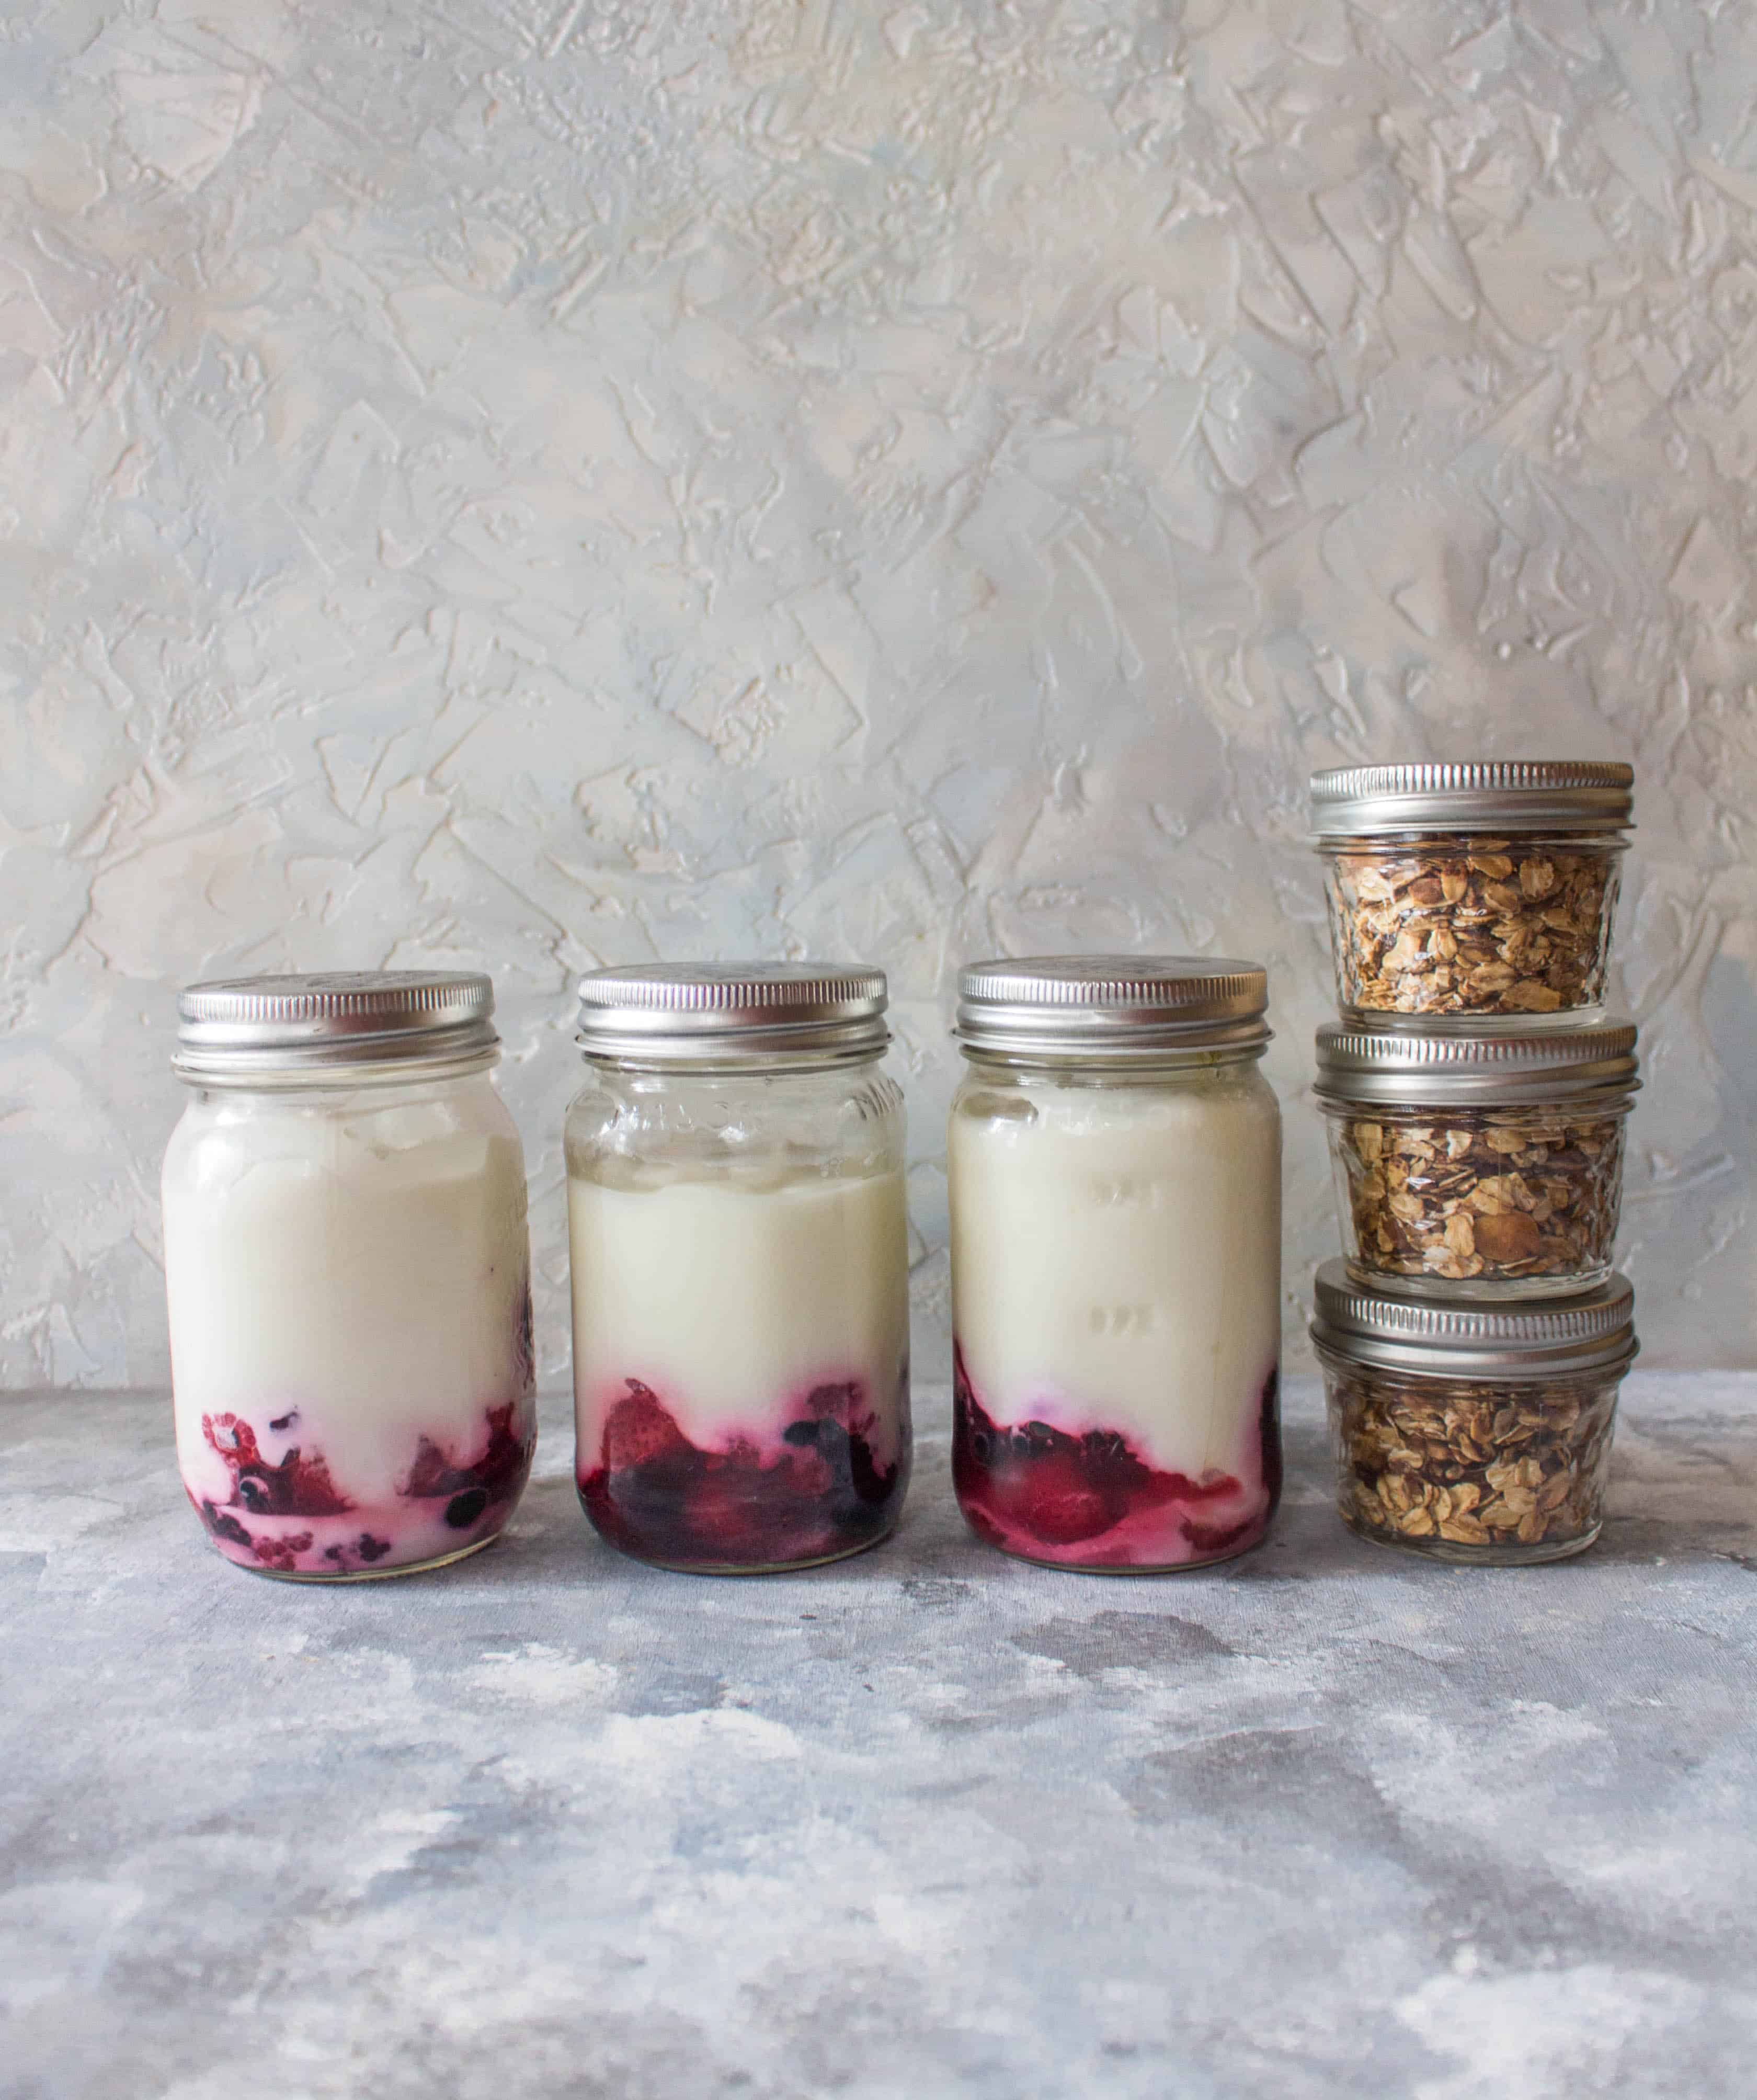 Grab some mason jars and prep your breakfasts so you can have a delicious and healthy start to your day during the week! These Yogurt with Fruit and Homemade Granola Breakfast Meal Prep will have you looking forward to your mornings!